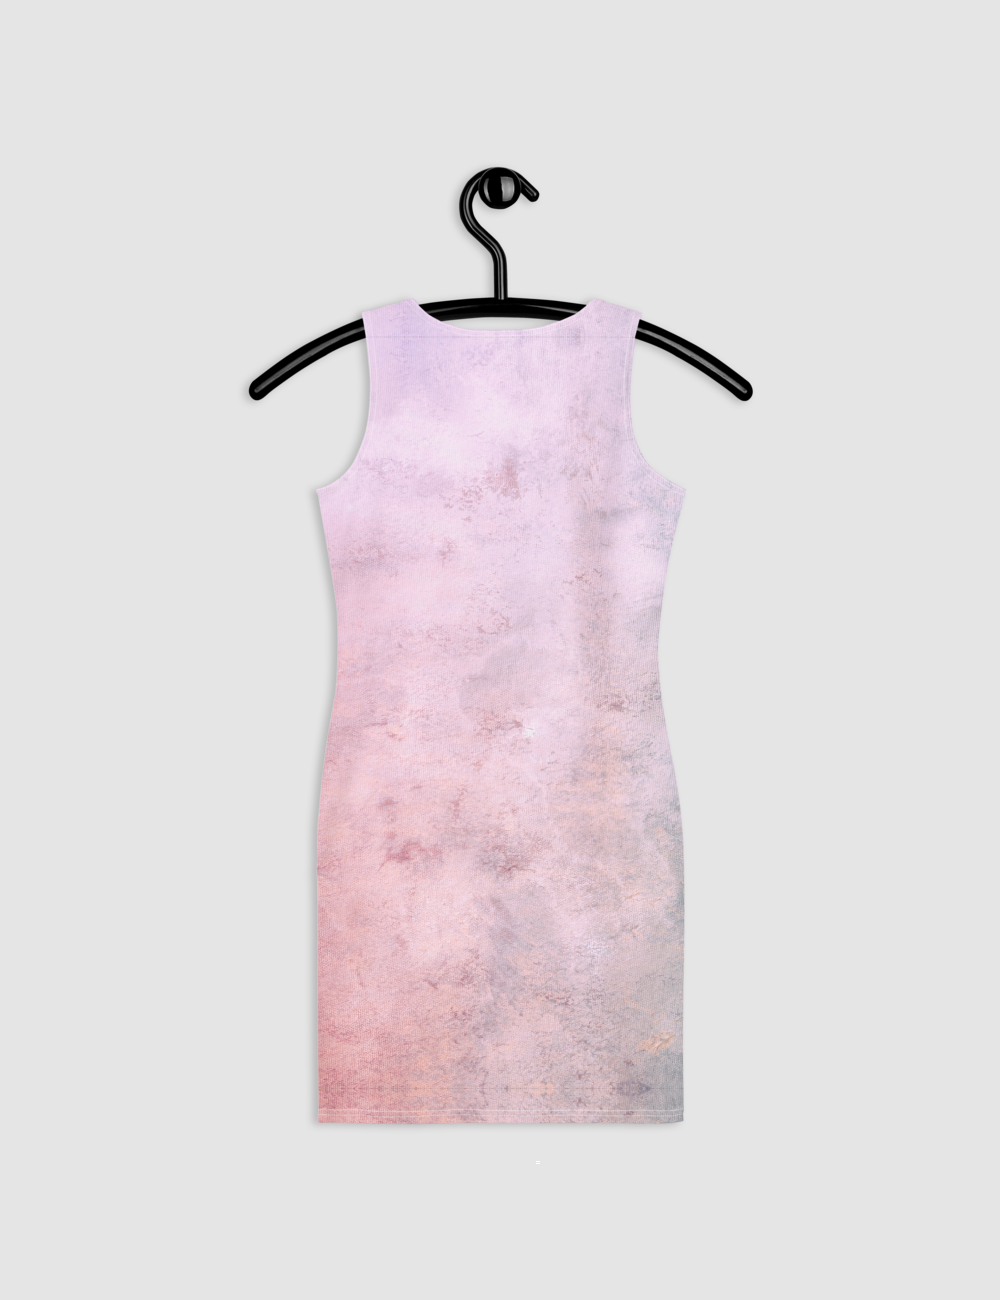 Painted Concrete Abstract | Women's Sleeveless Fitted Sublimated Dress OniTakai